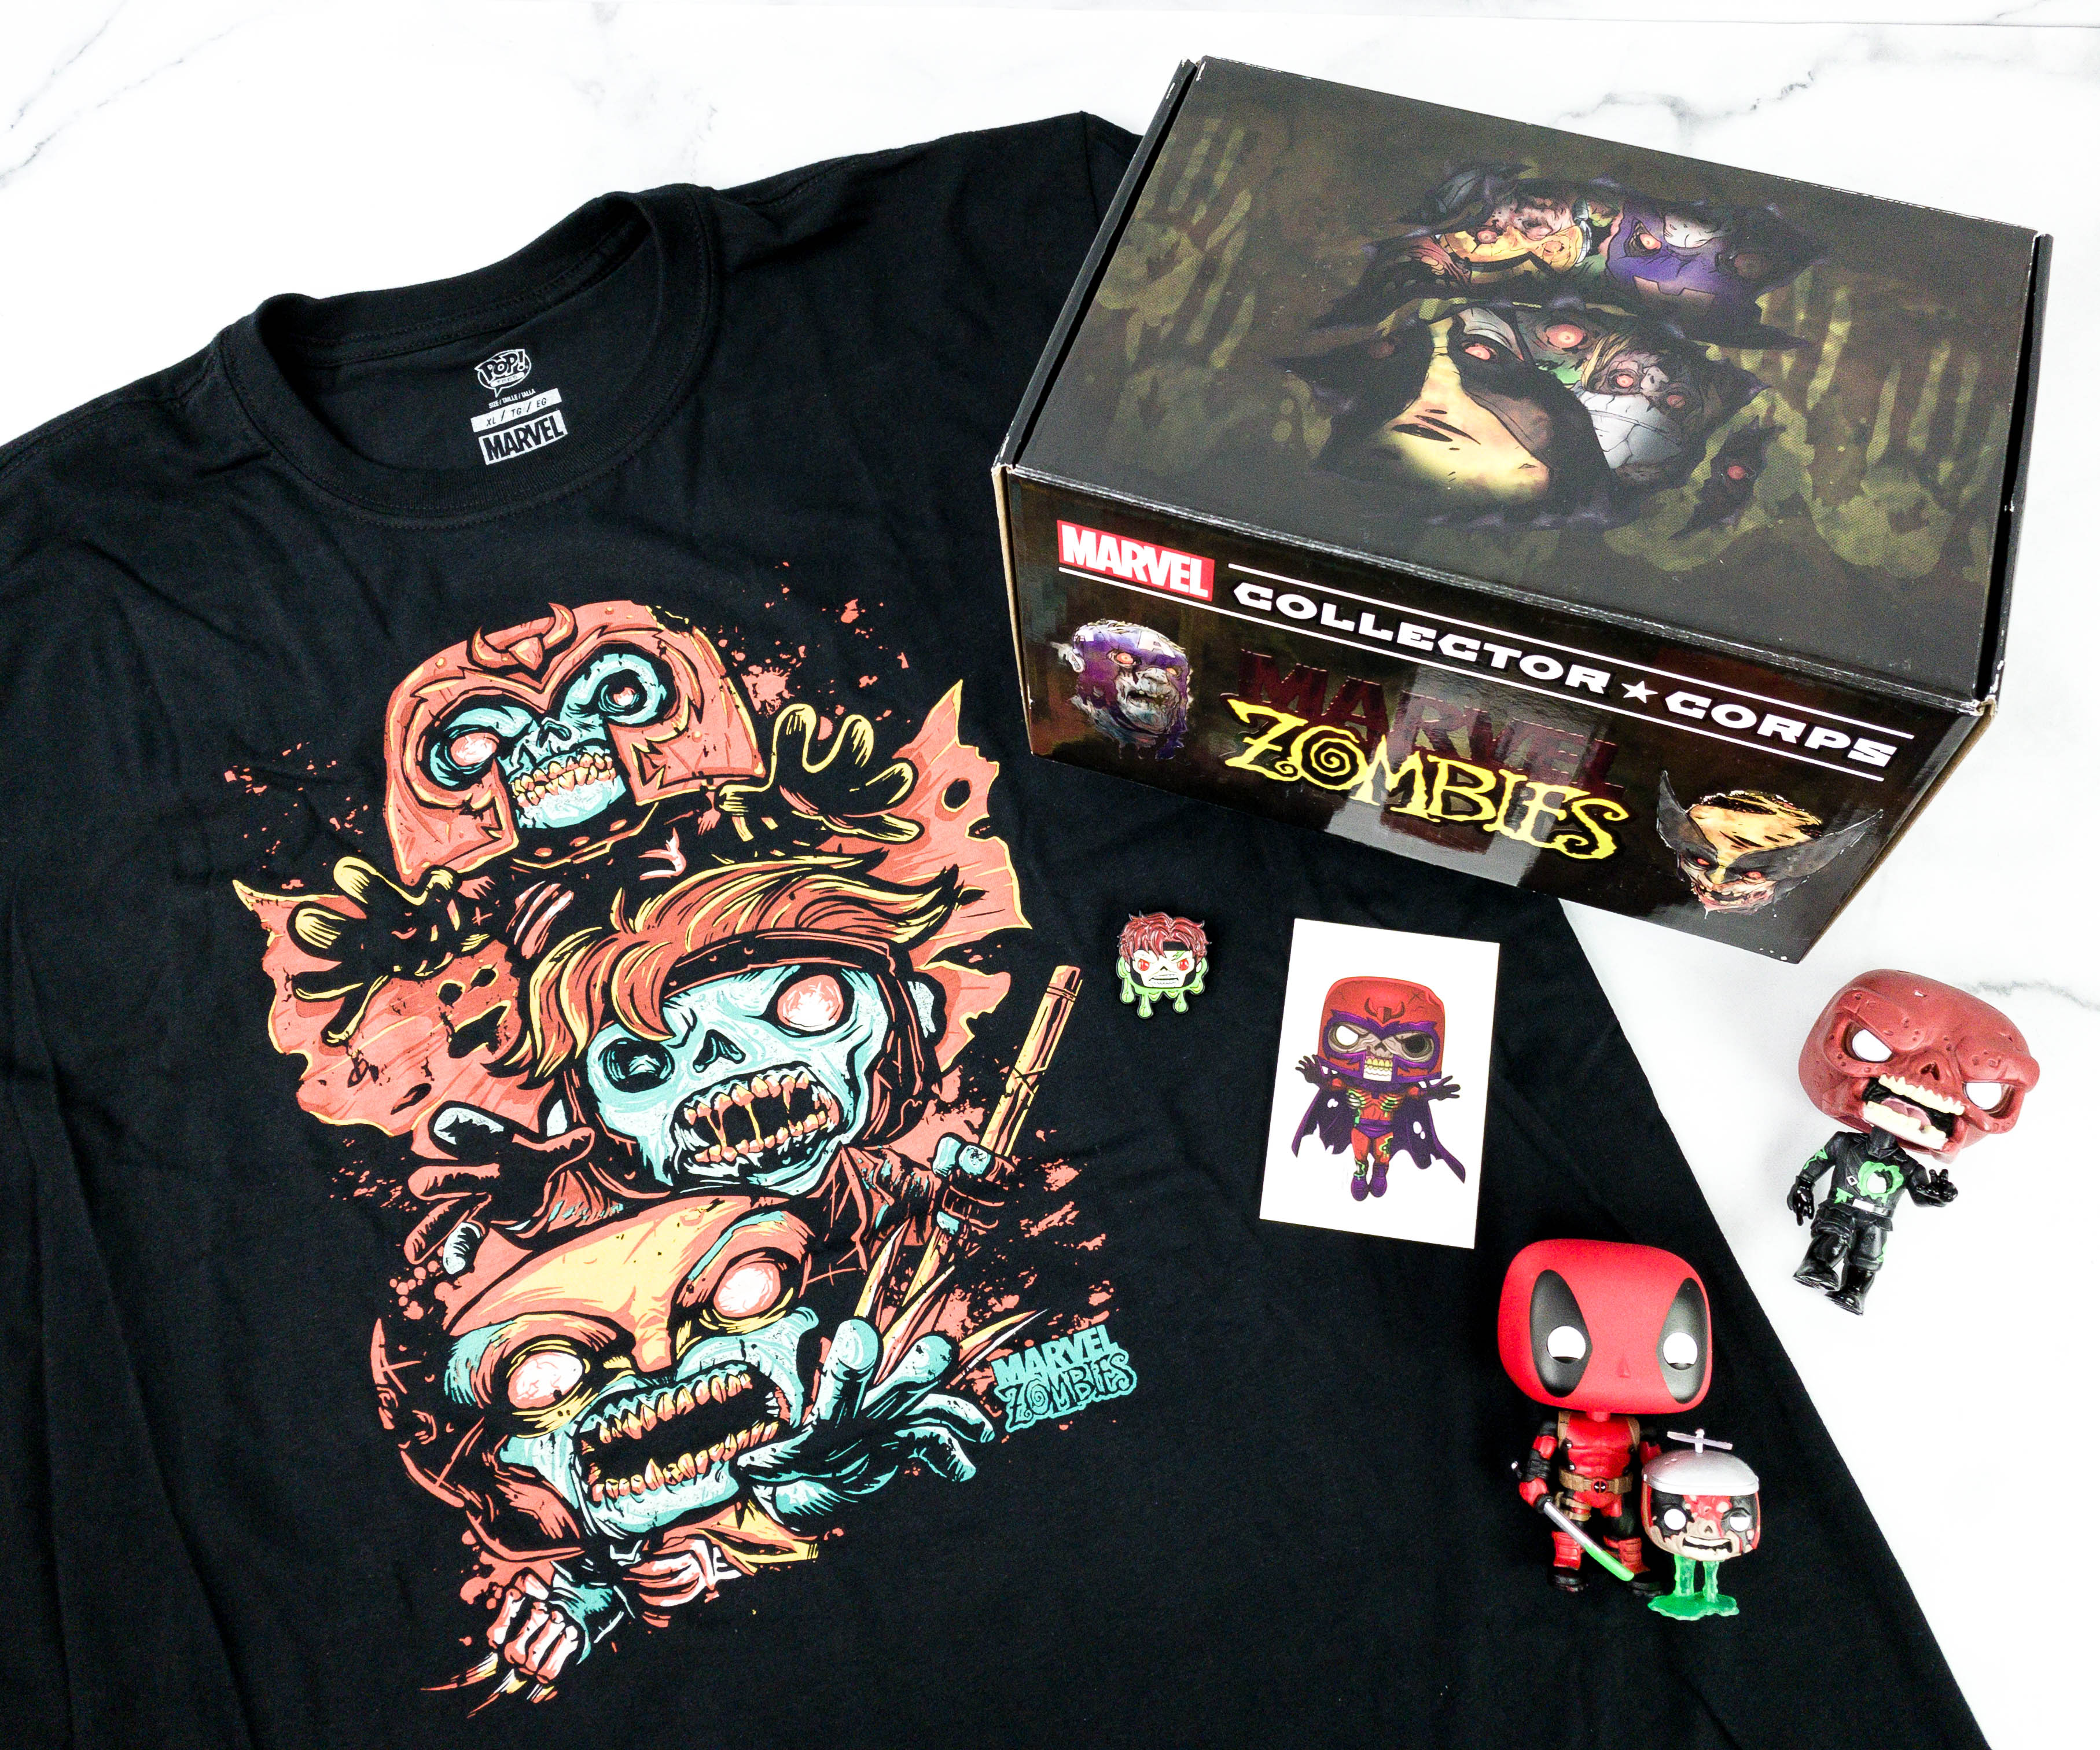 September 2020 XL T-Shirt Funko Marvel Collector Corps Subscription Box Marvel Zombies Theme 